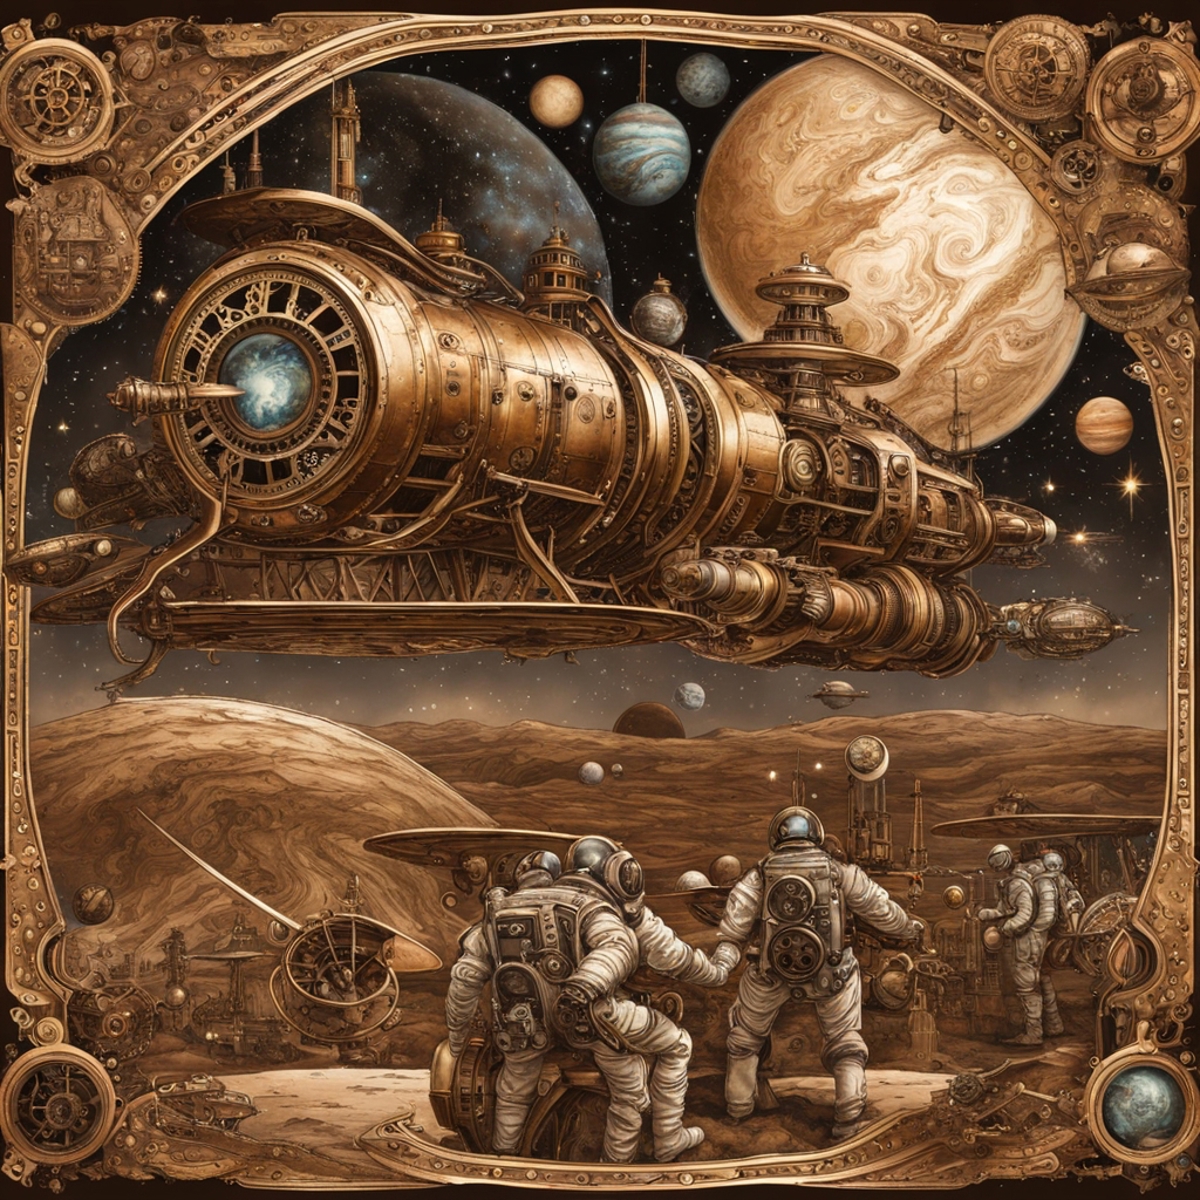 SteampunkAI [10MB] LoRA extraction image by omniinfer815